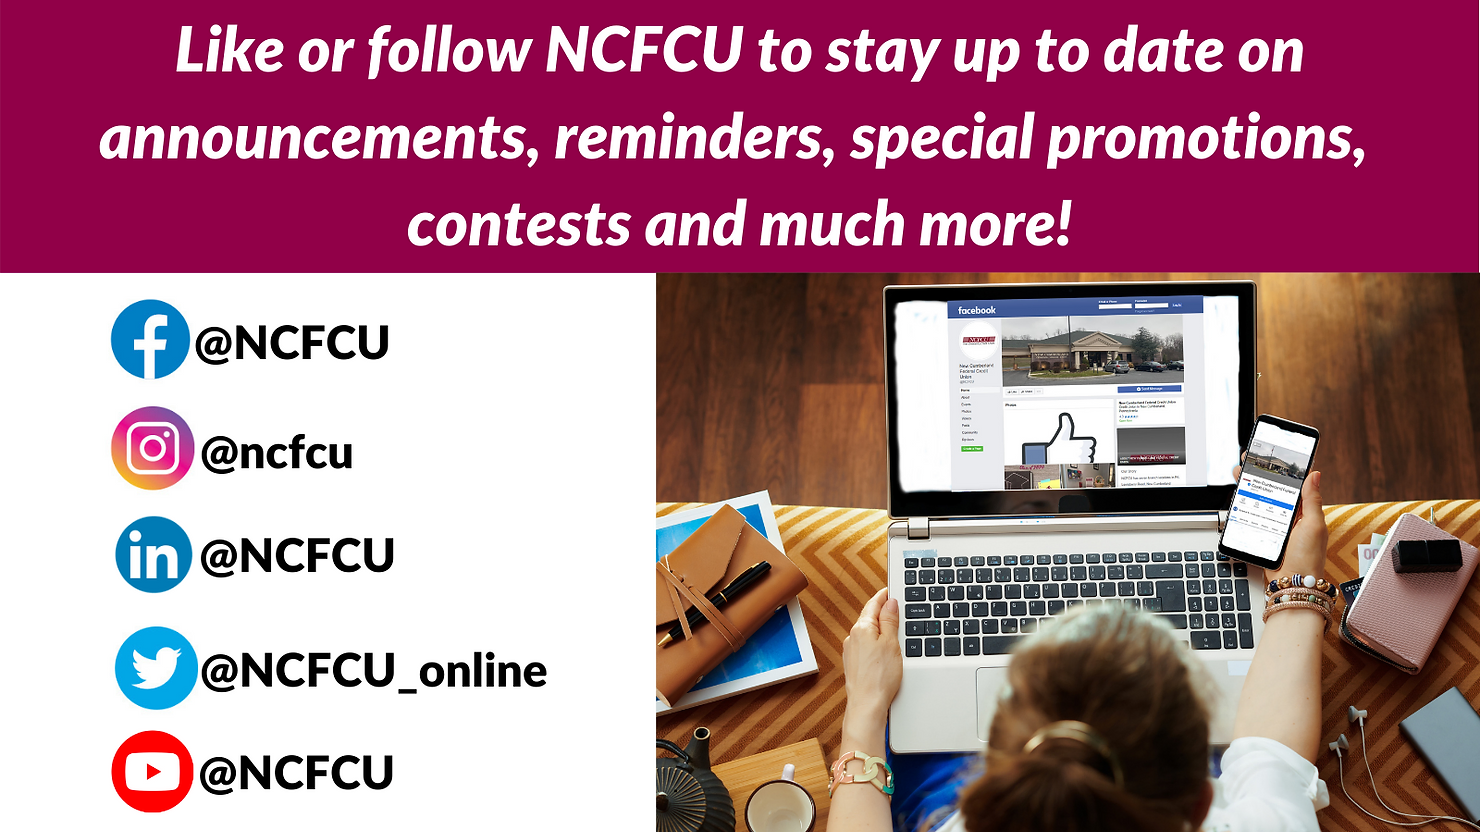 NCFCU has a Social Life! featured image